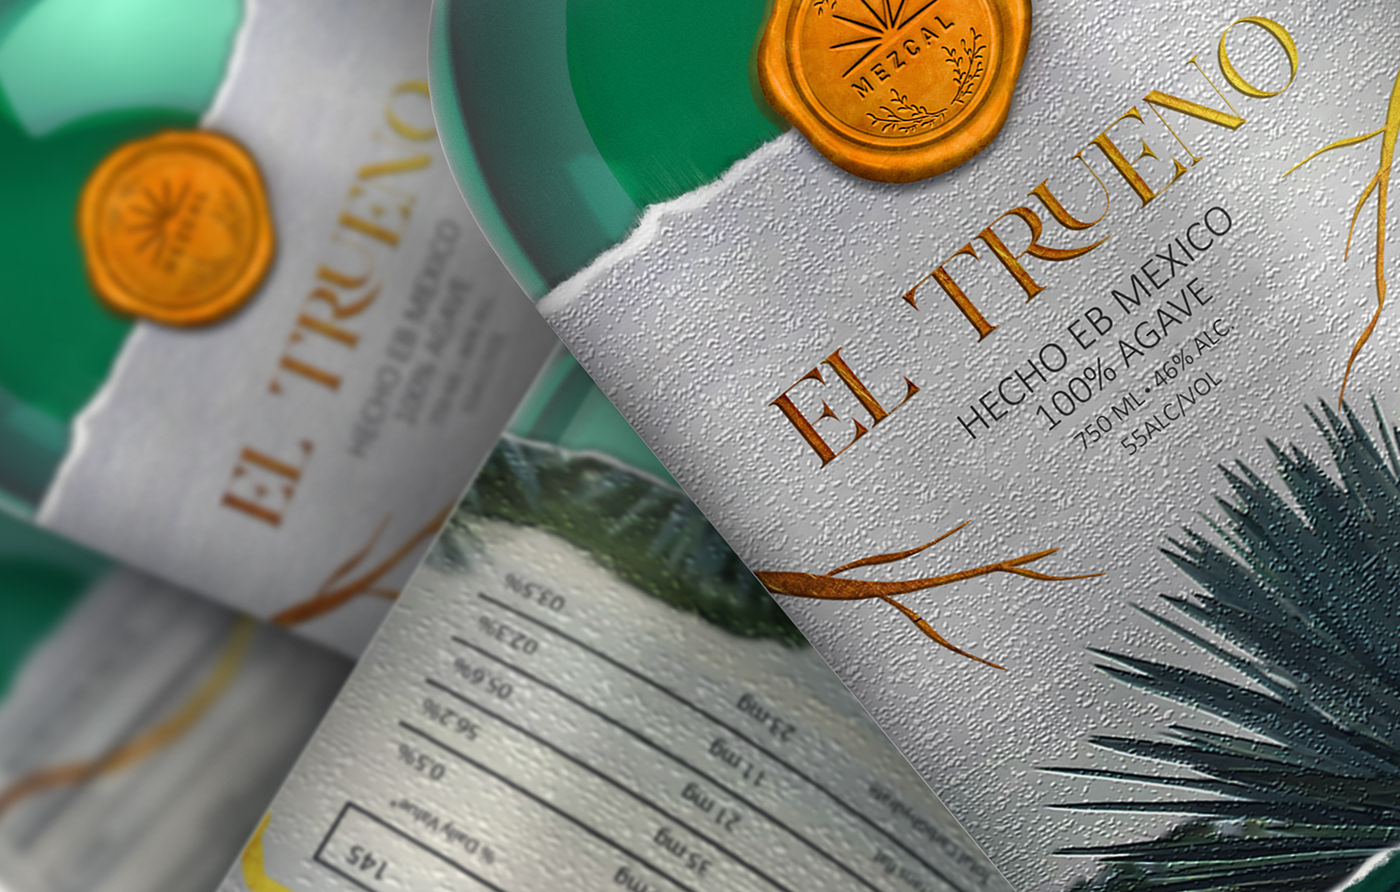 alcohol bottle brand identity Branding design drink Label mexico mezcal Packaging Tequila